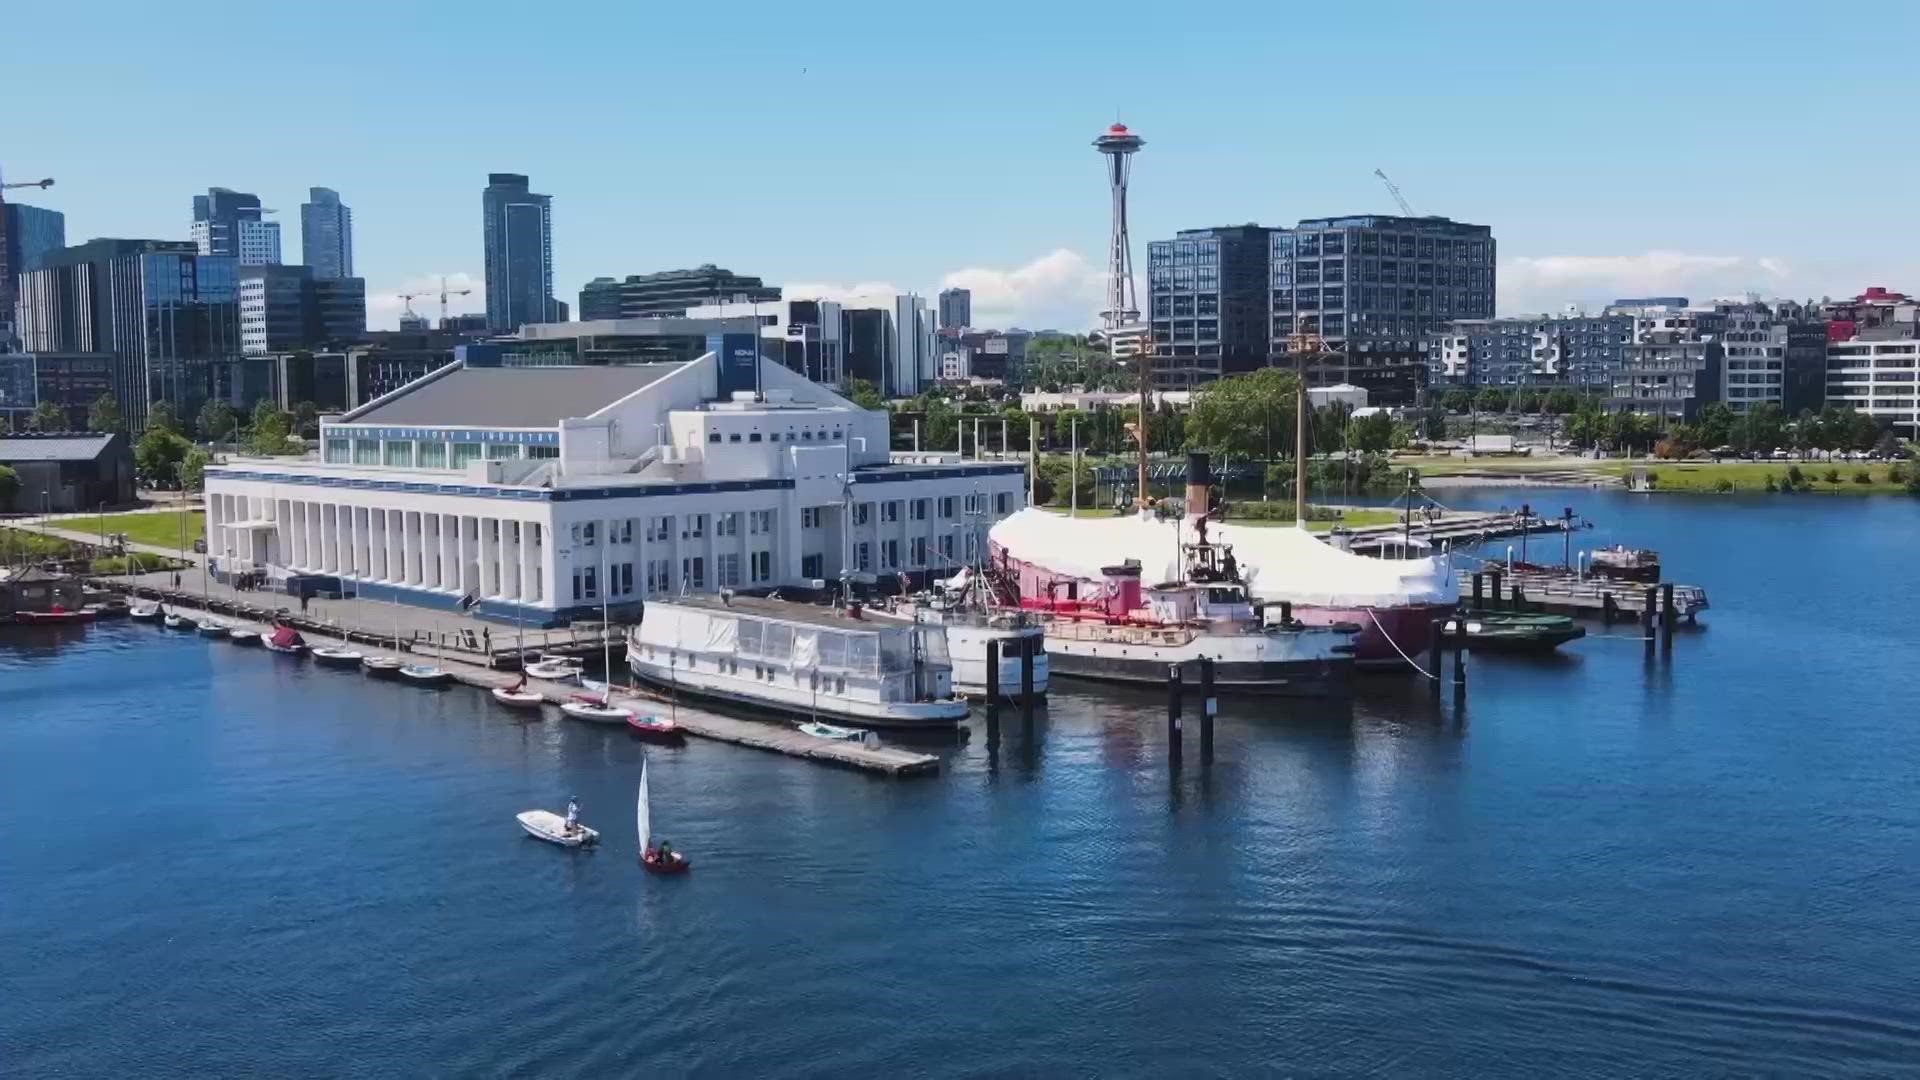 Take a look at Lake Union of one of the first days of summer.